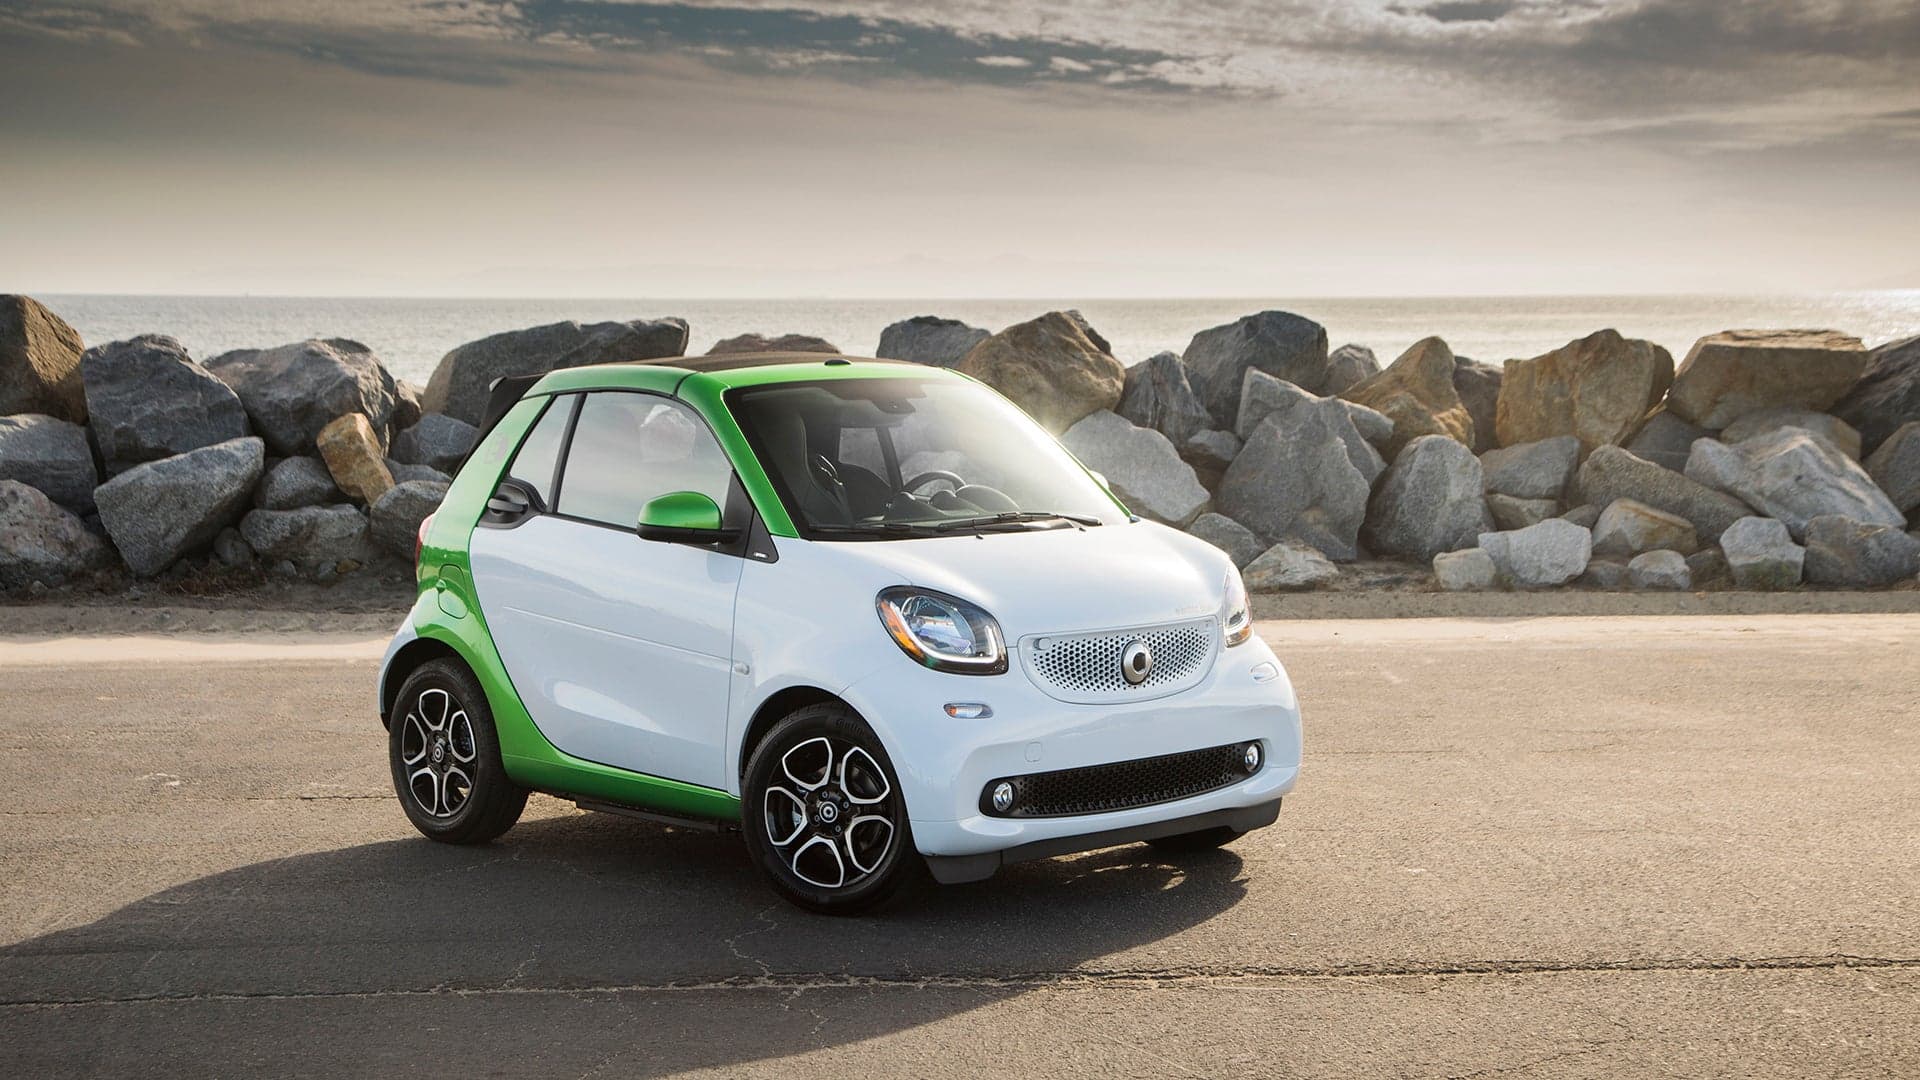 2018 Smart ForTwo Electric Drive Cabrio Review: A Fun Little Car That’s Hard to Make Sense Of